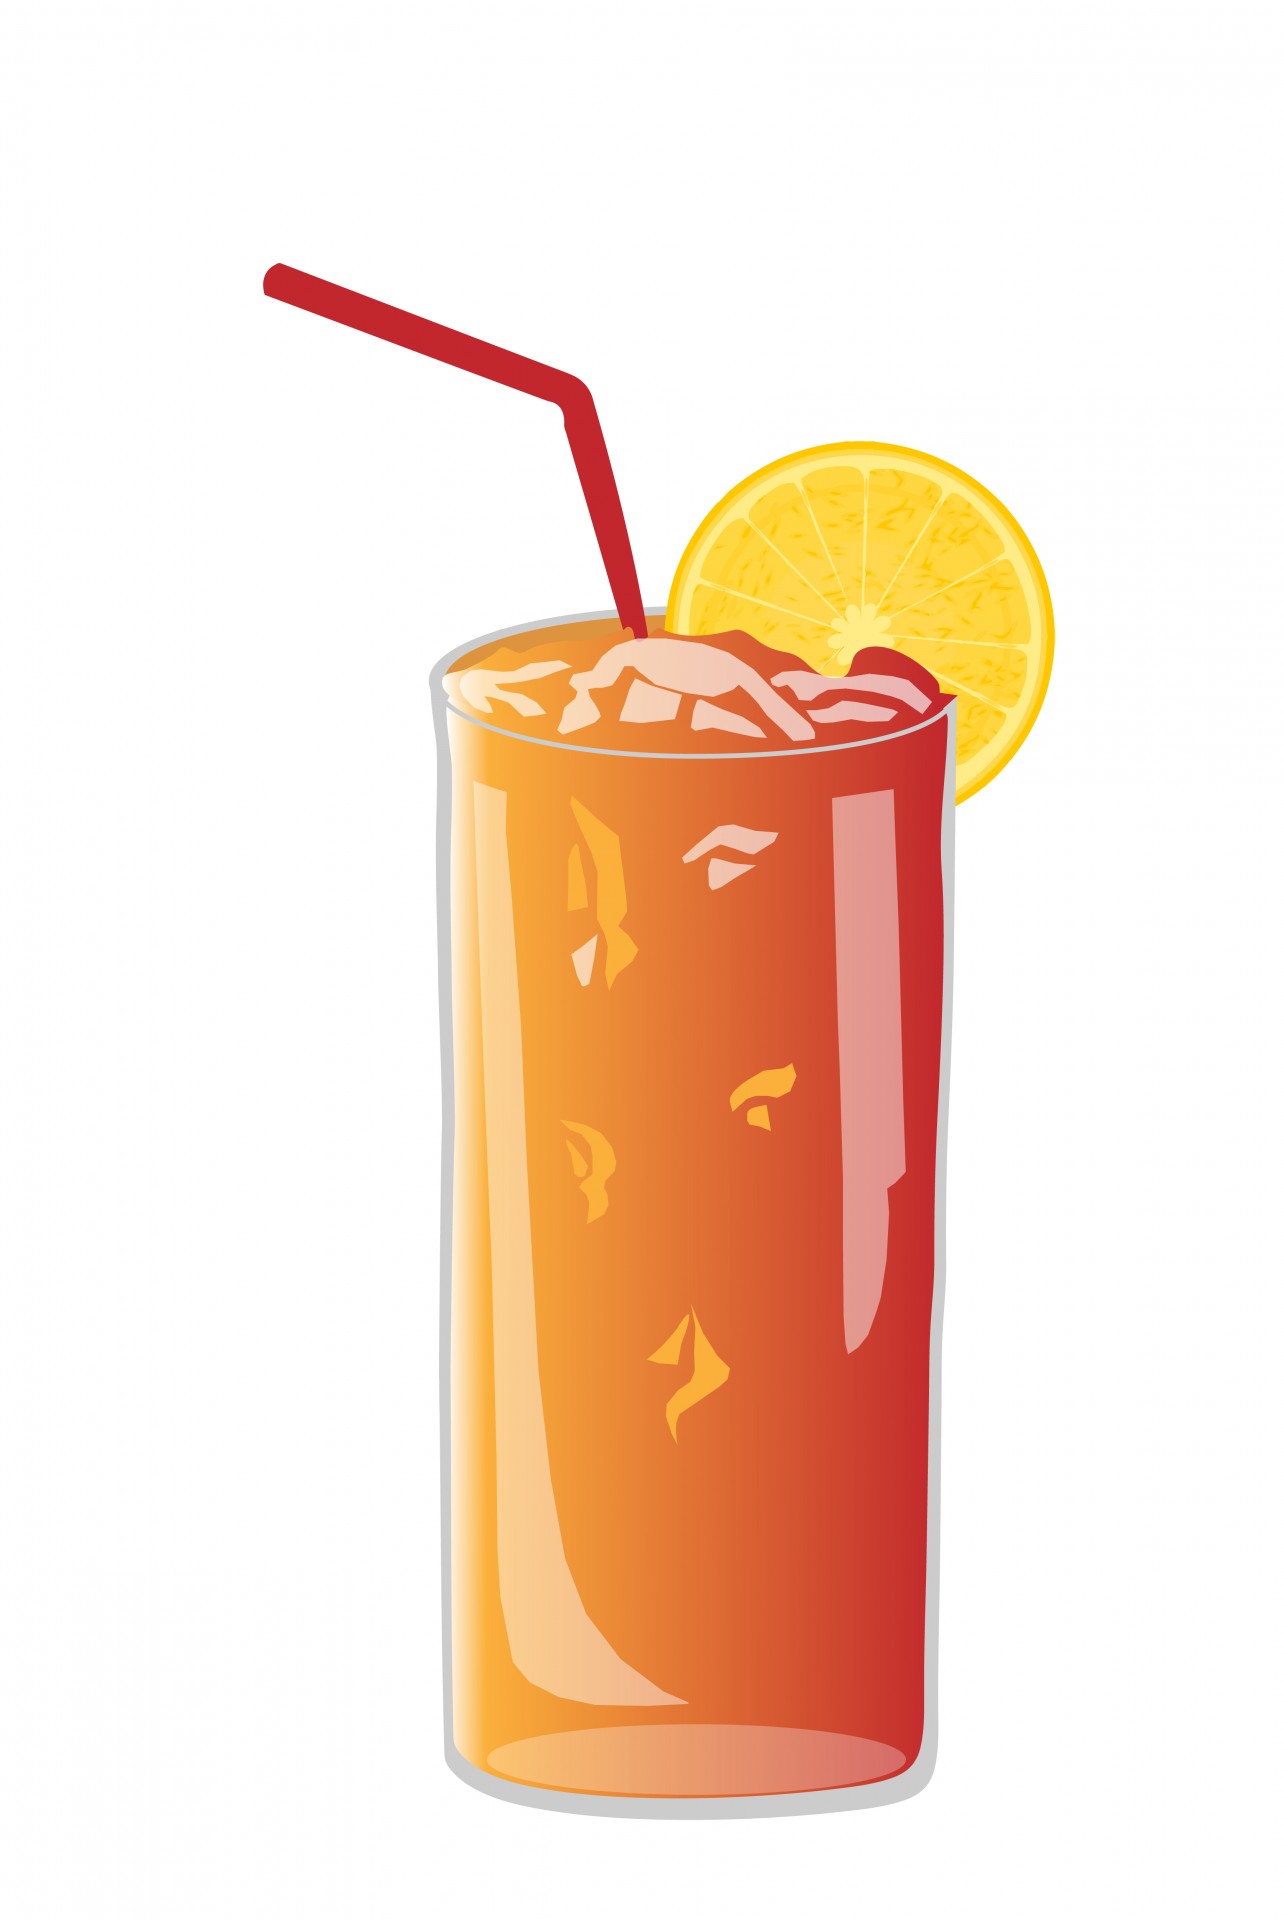 glass of juice clipart - photo #23